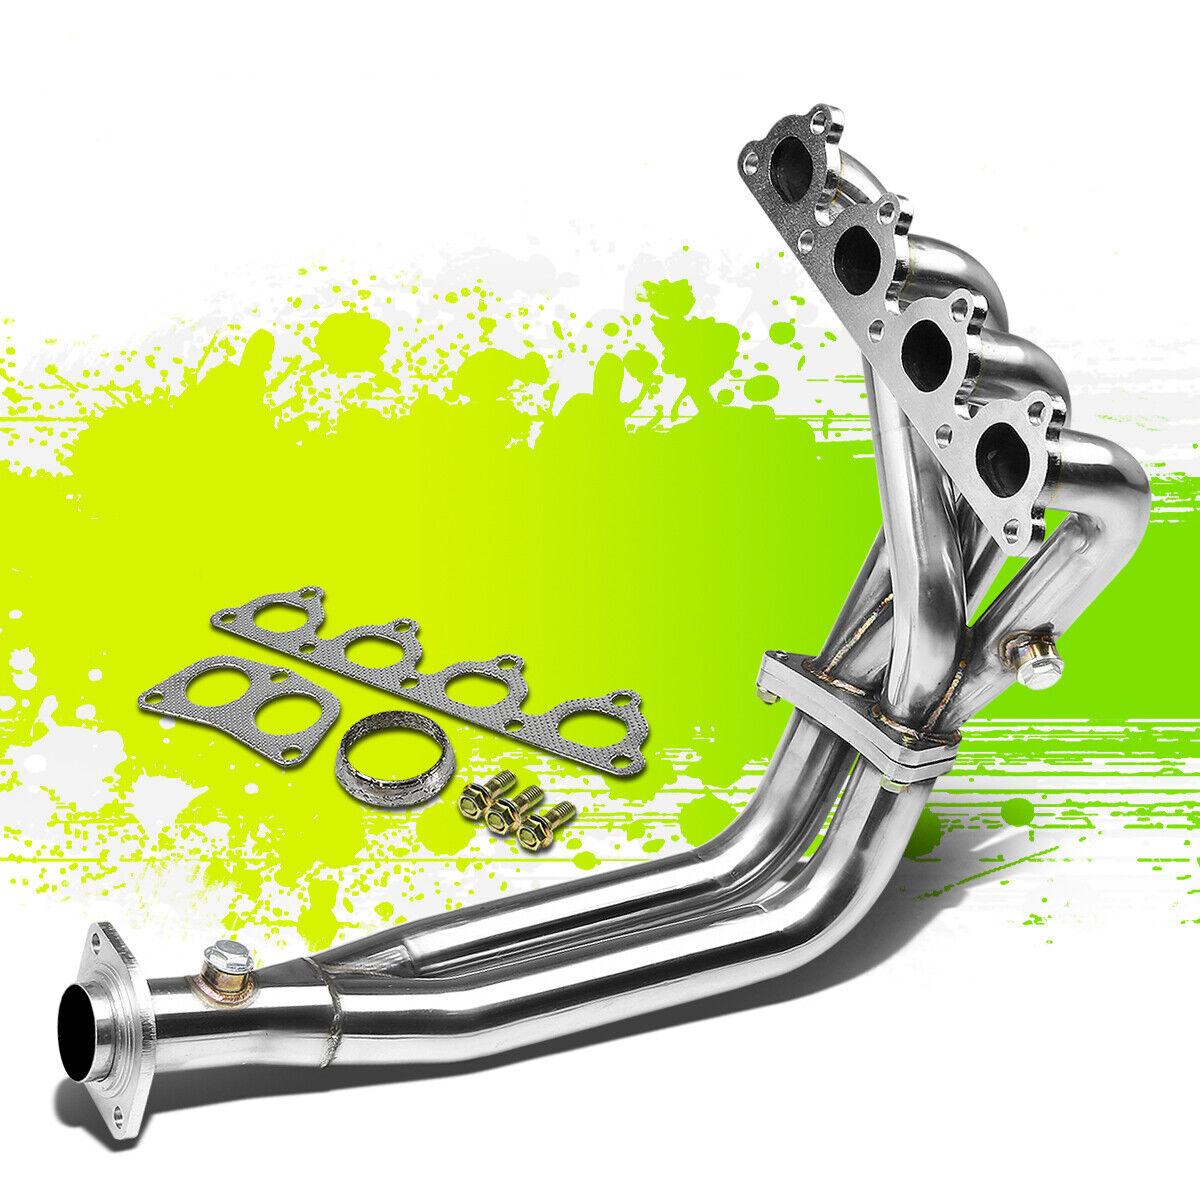 Stainless Steel Manifold Exhaust Header for Honda Civic CRX Del Sol SOHC 88-00